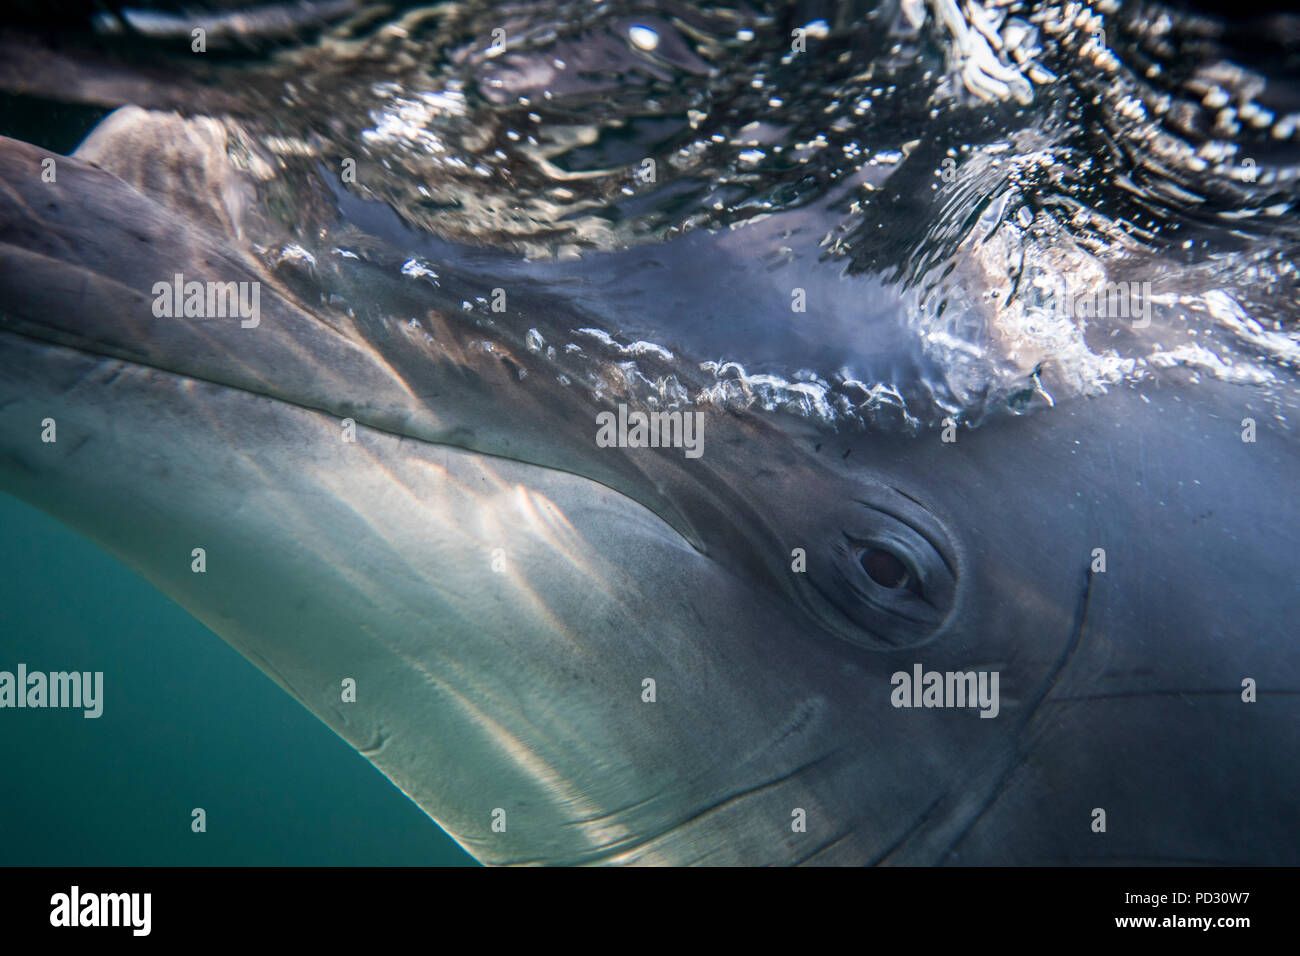 Bottlenose dolphin's eye, close-up, underwater view Stock Photo